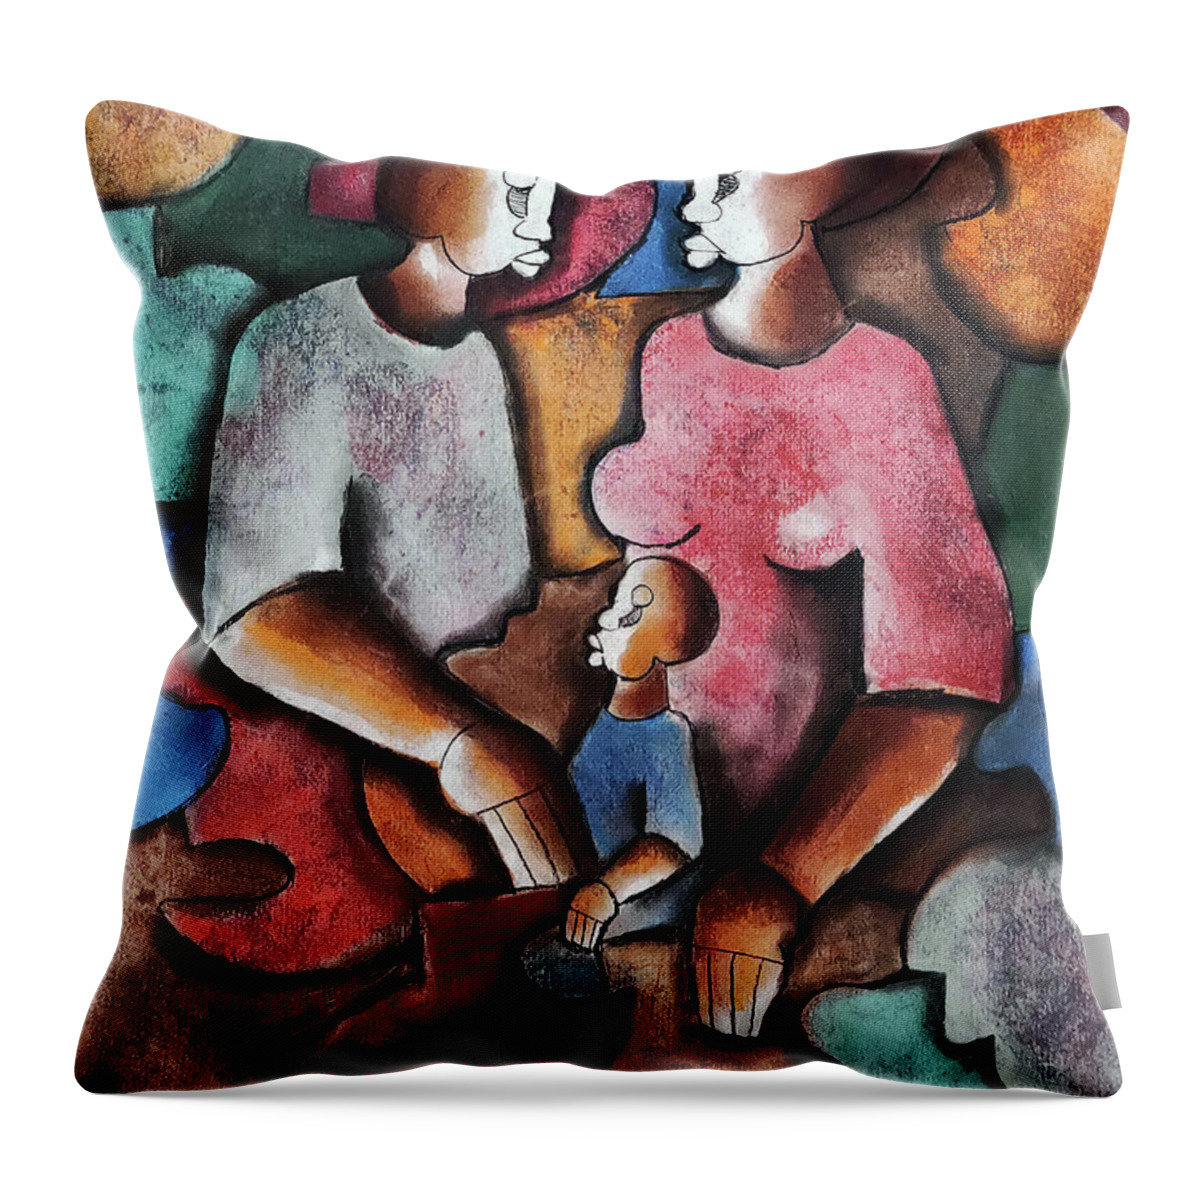 African Art Throw Pillow featuring the painting Circle of Love by Peter Sibeko 1940-2013